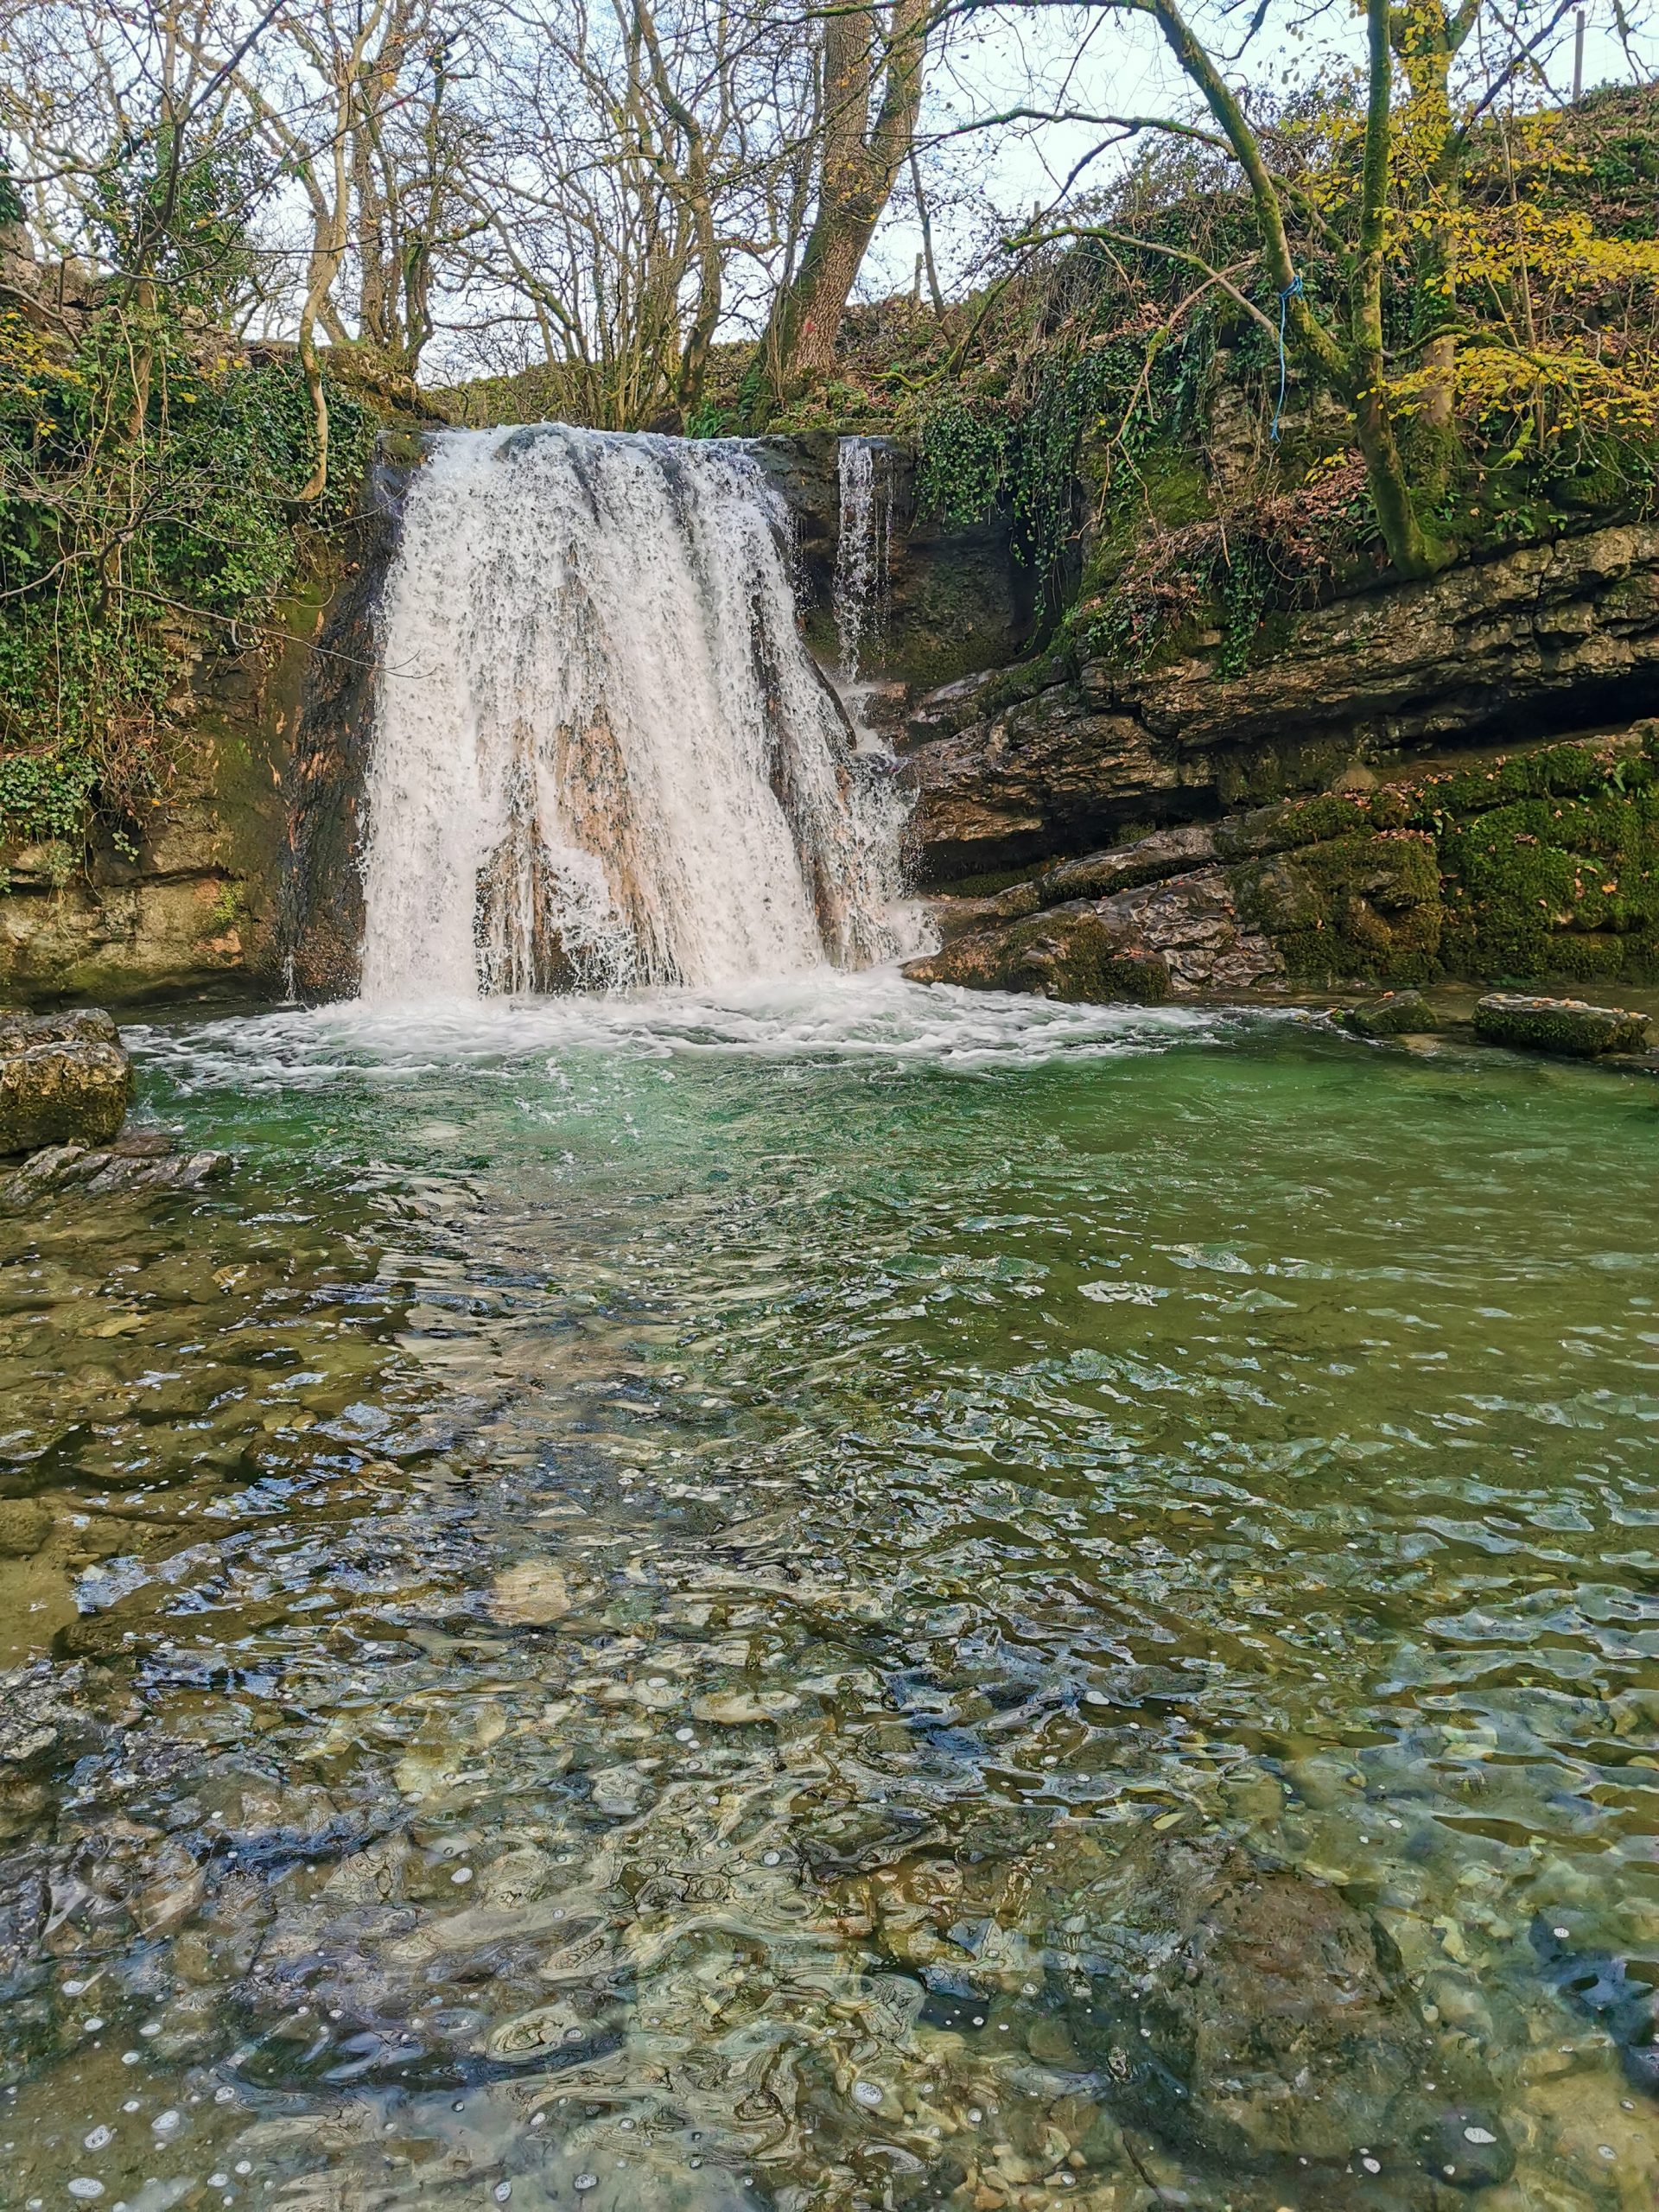 Malham Cove has been named a dog-friendly waterfall walk. Credit: The Manc Group